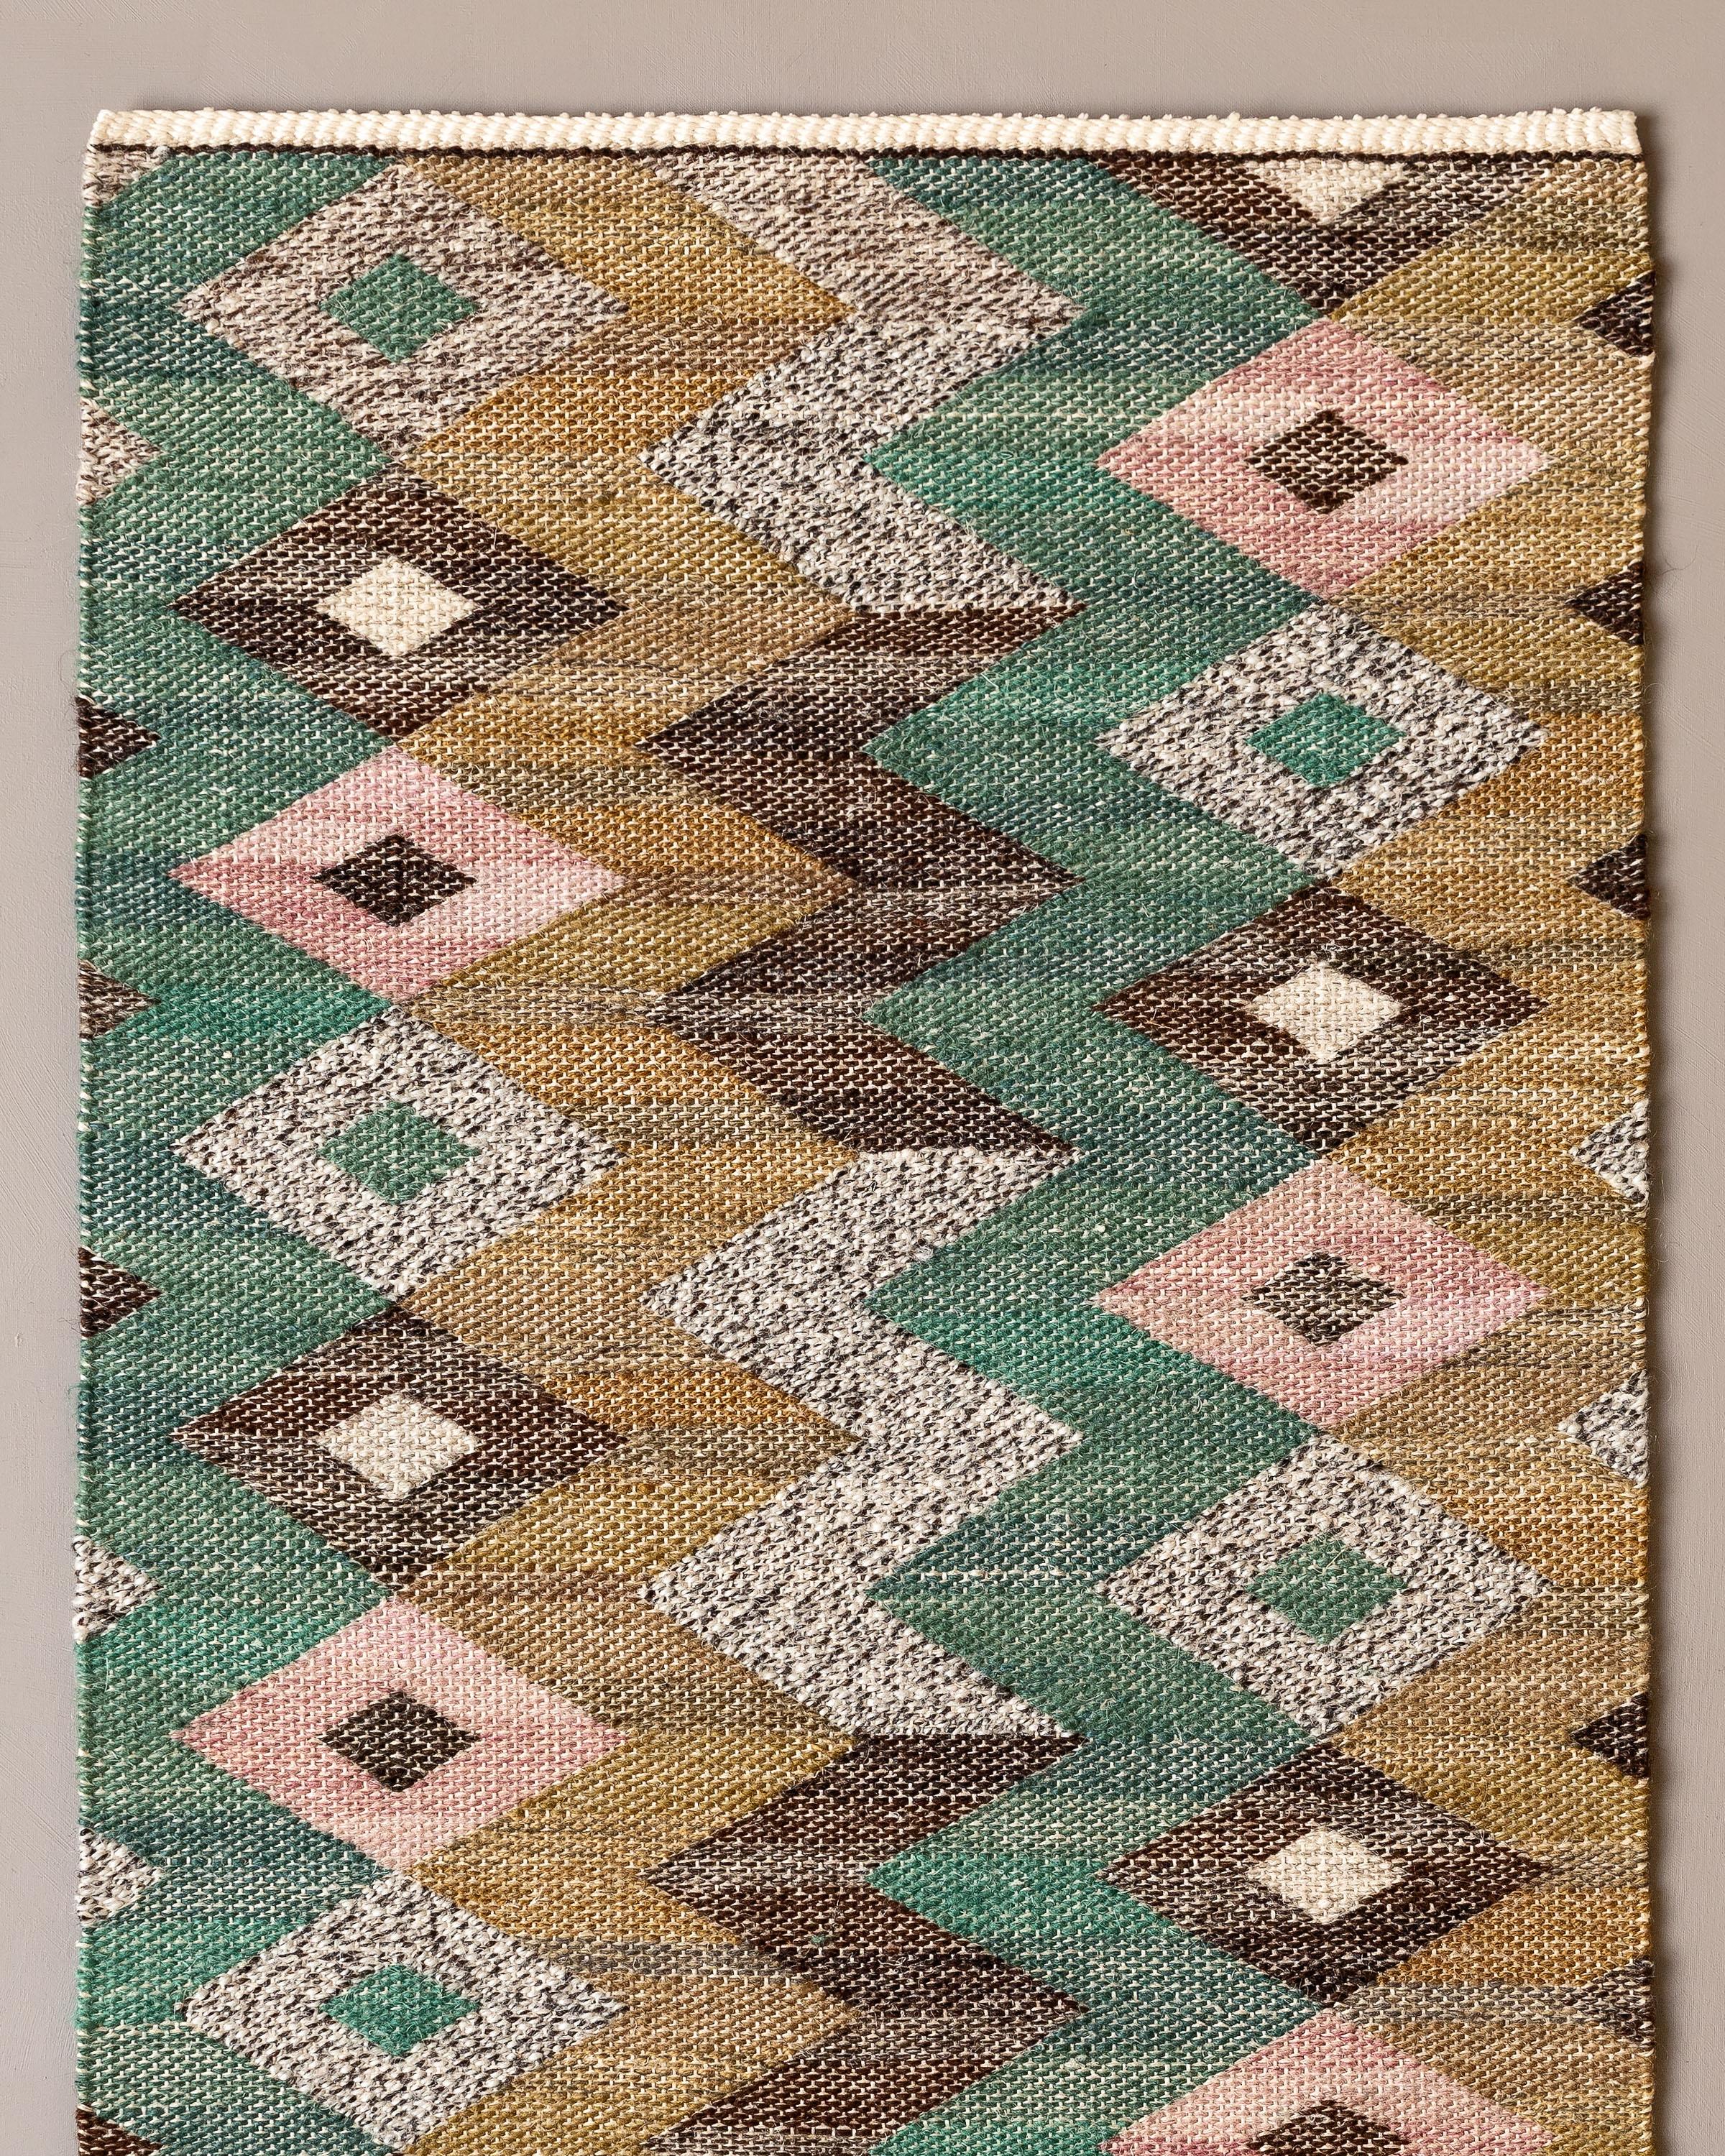 Handwoven tapestry with geometric pattern, designed by Märta Måås-Fjetterström in 1928. 

Woven in wool and hand spun linen on a linen warp by artisan weaver Märta Paulsson in 1996 at the Märta Måås-Fjetterström studio in Båstad, Sweden. 

The